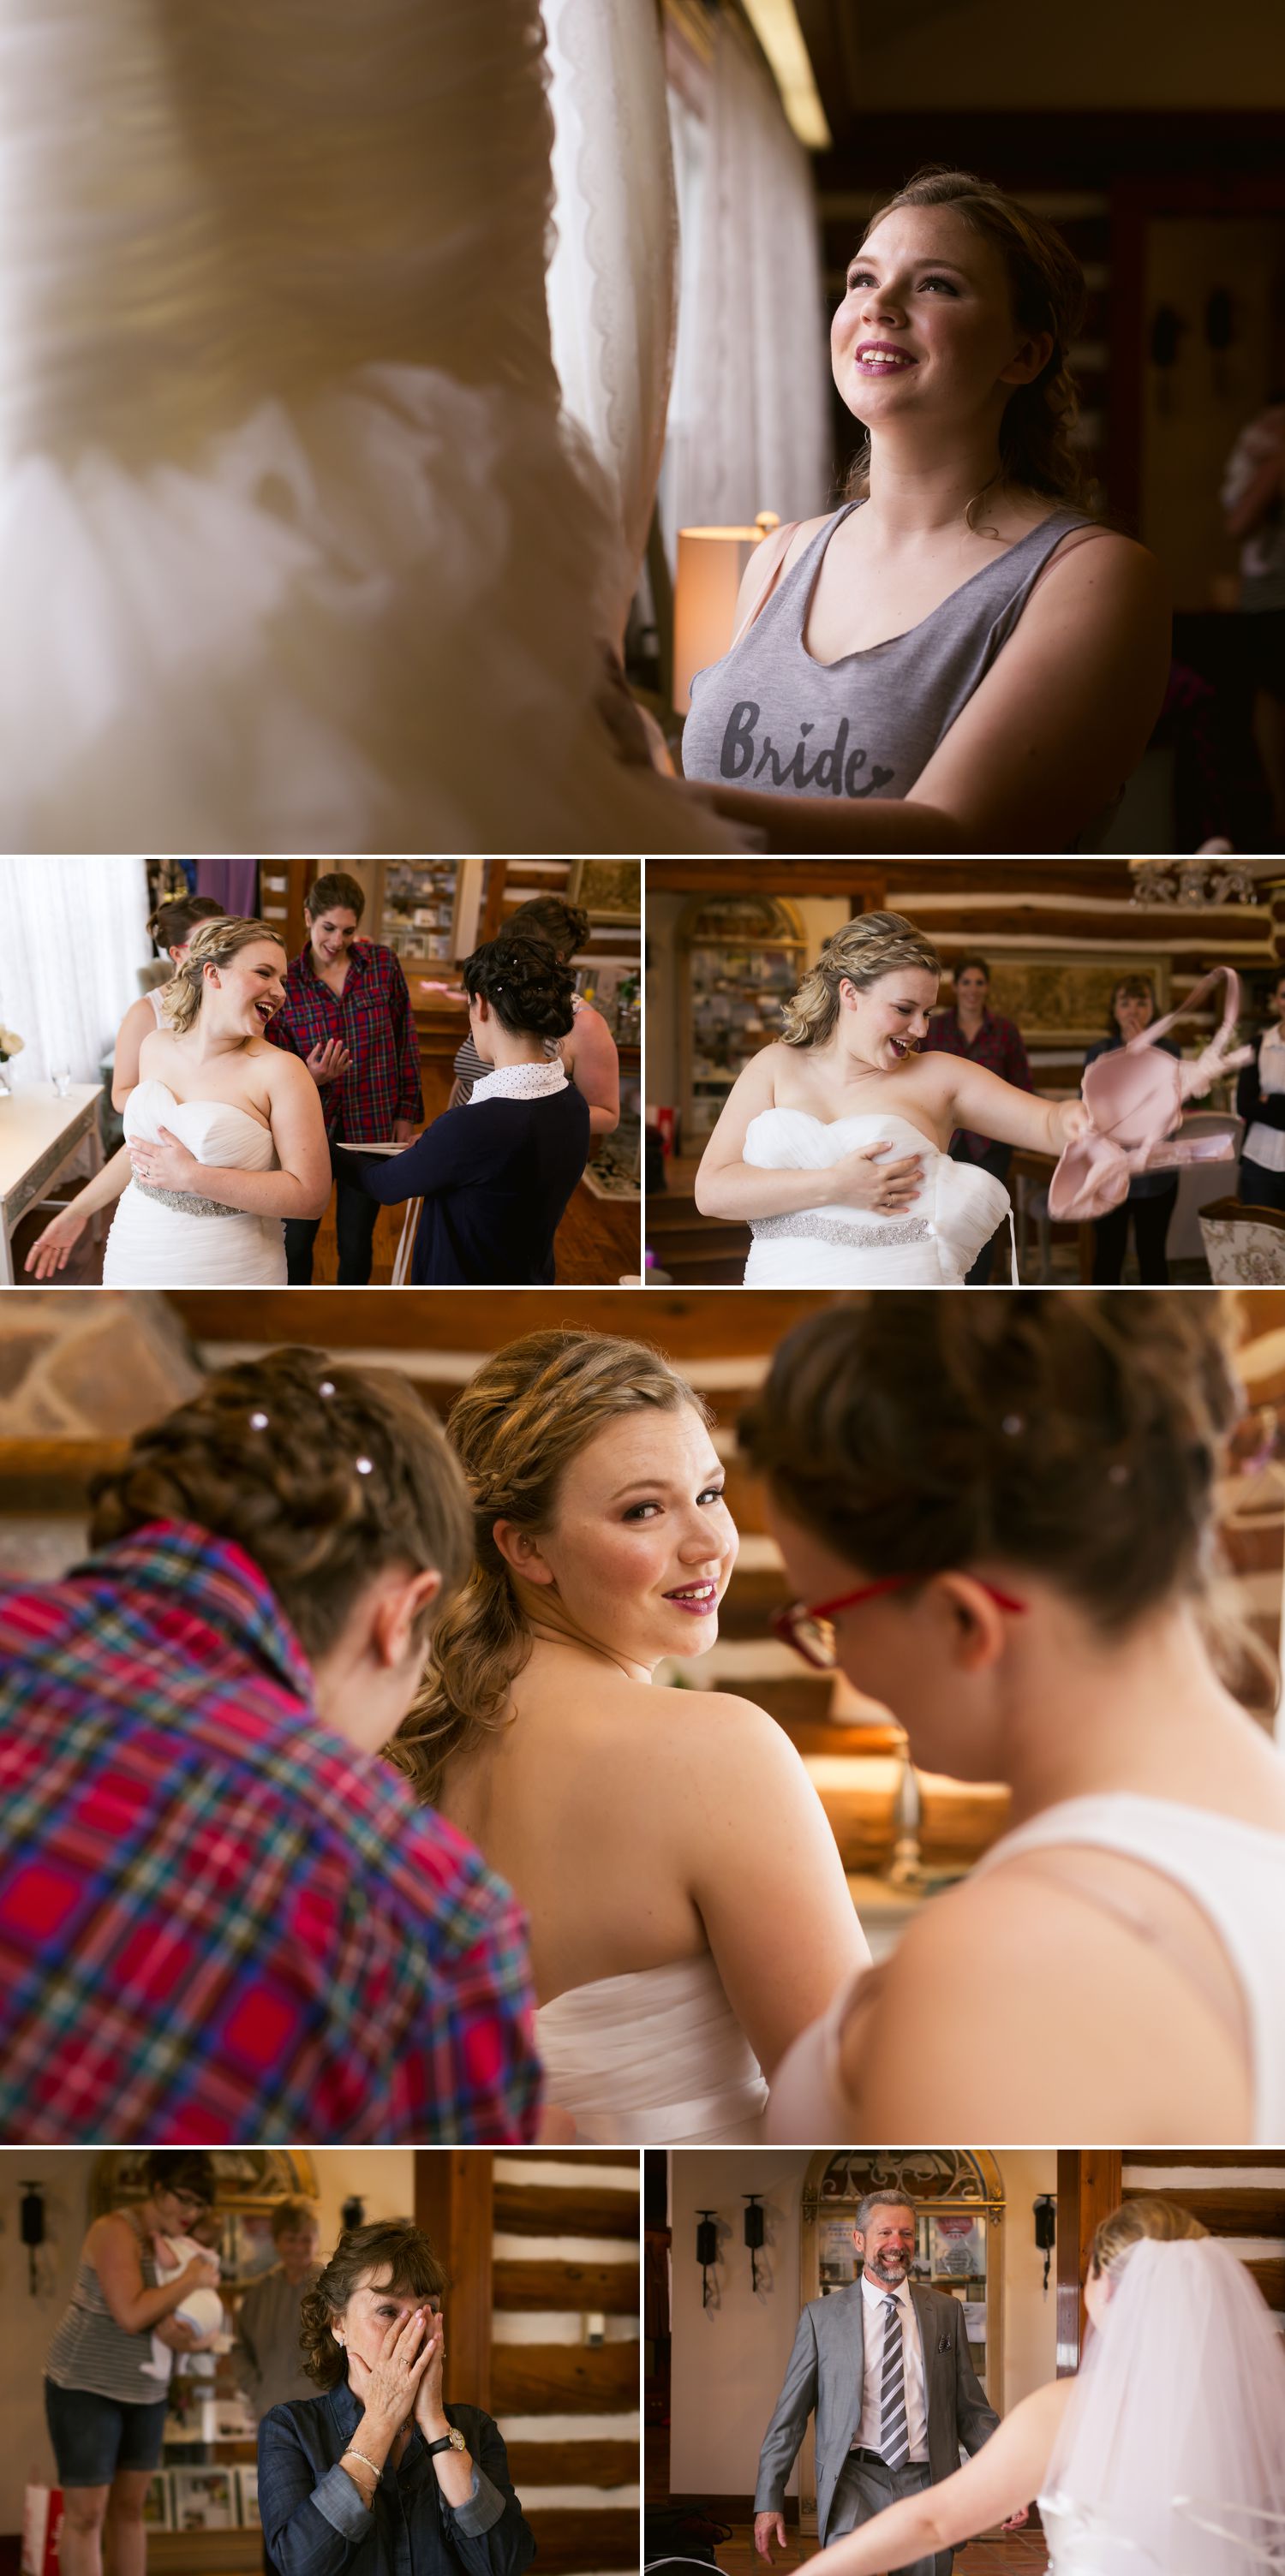 The bride getting ready with her bridesmaids and family at Stonefields